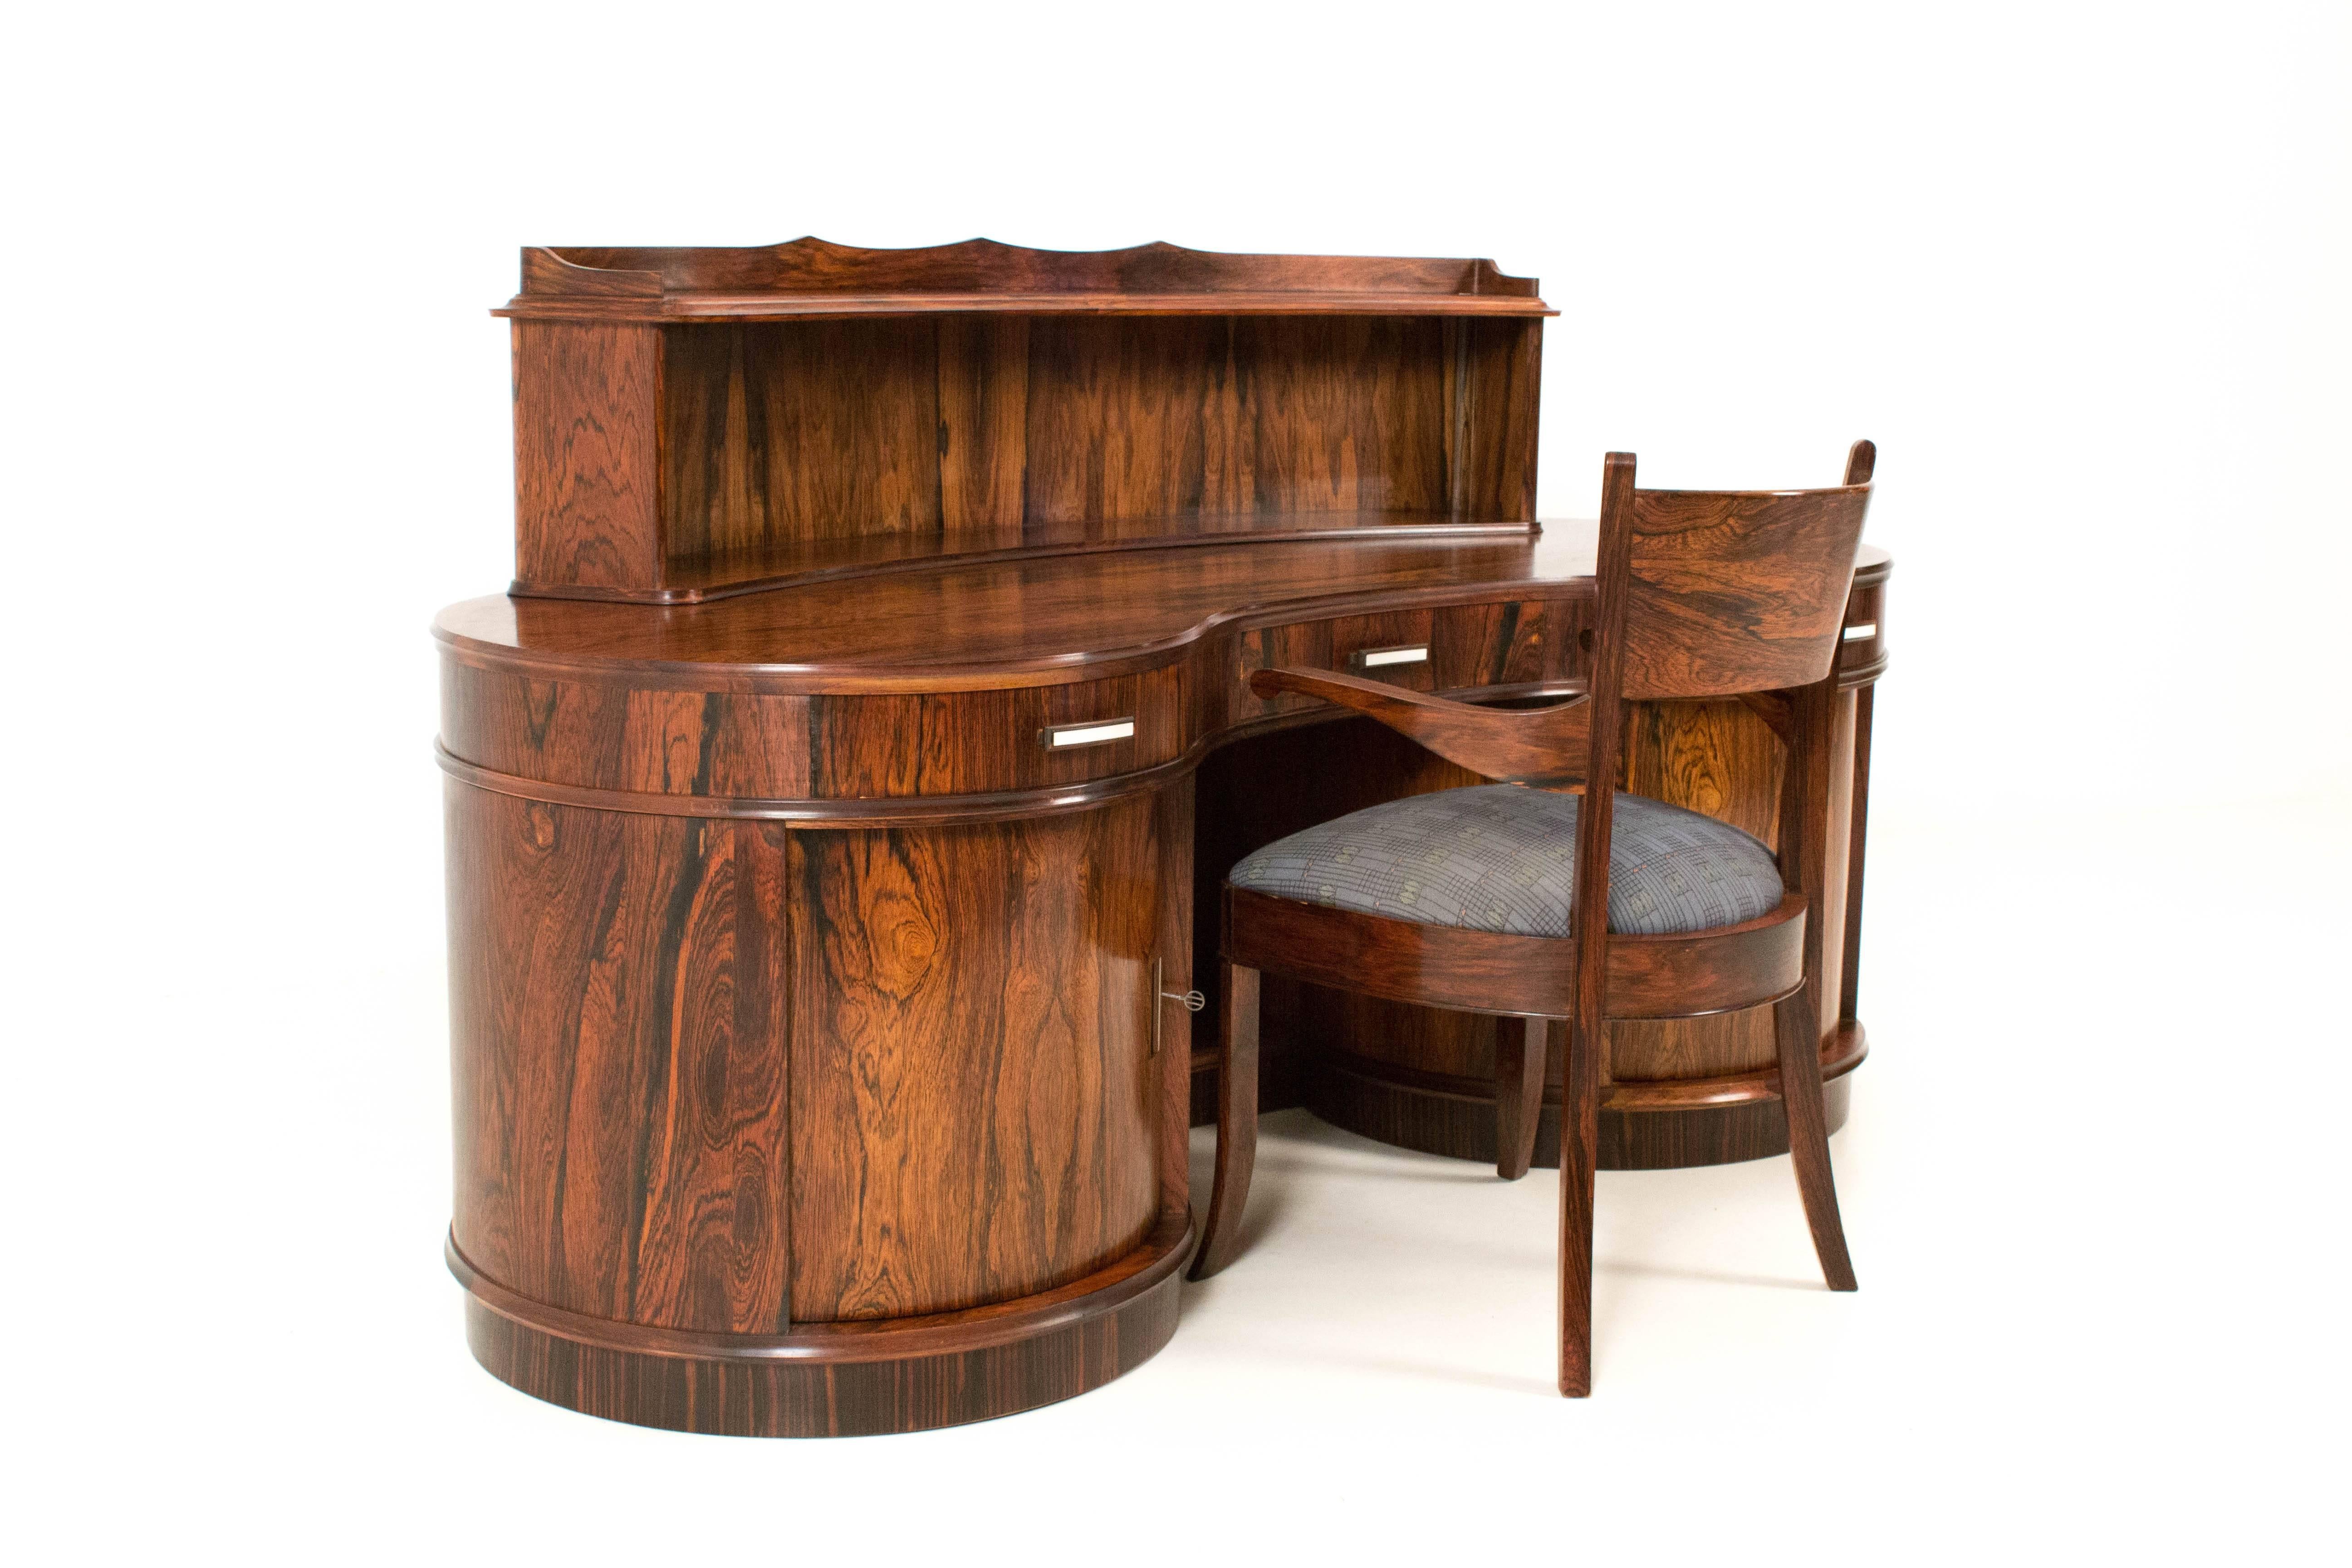 Dutch Magnificent Art Deco Kidney Shaped Desk with Armchair by Reens Amsterdam